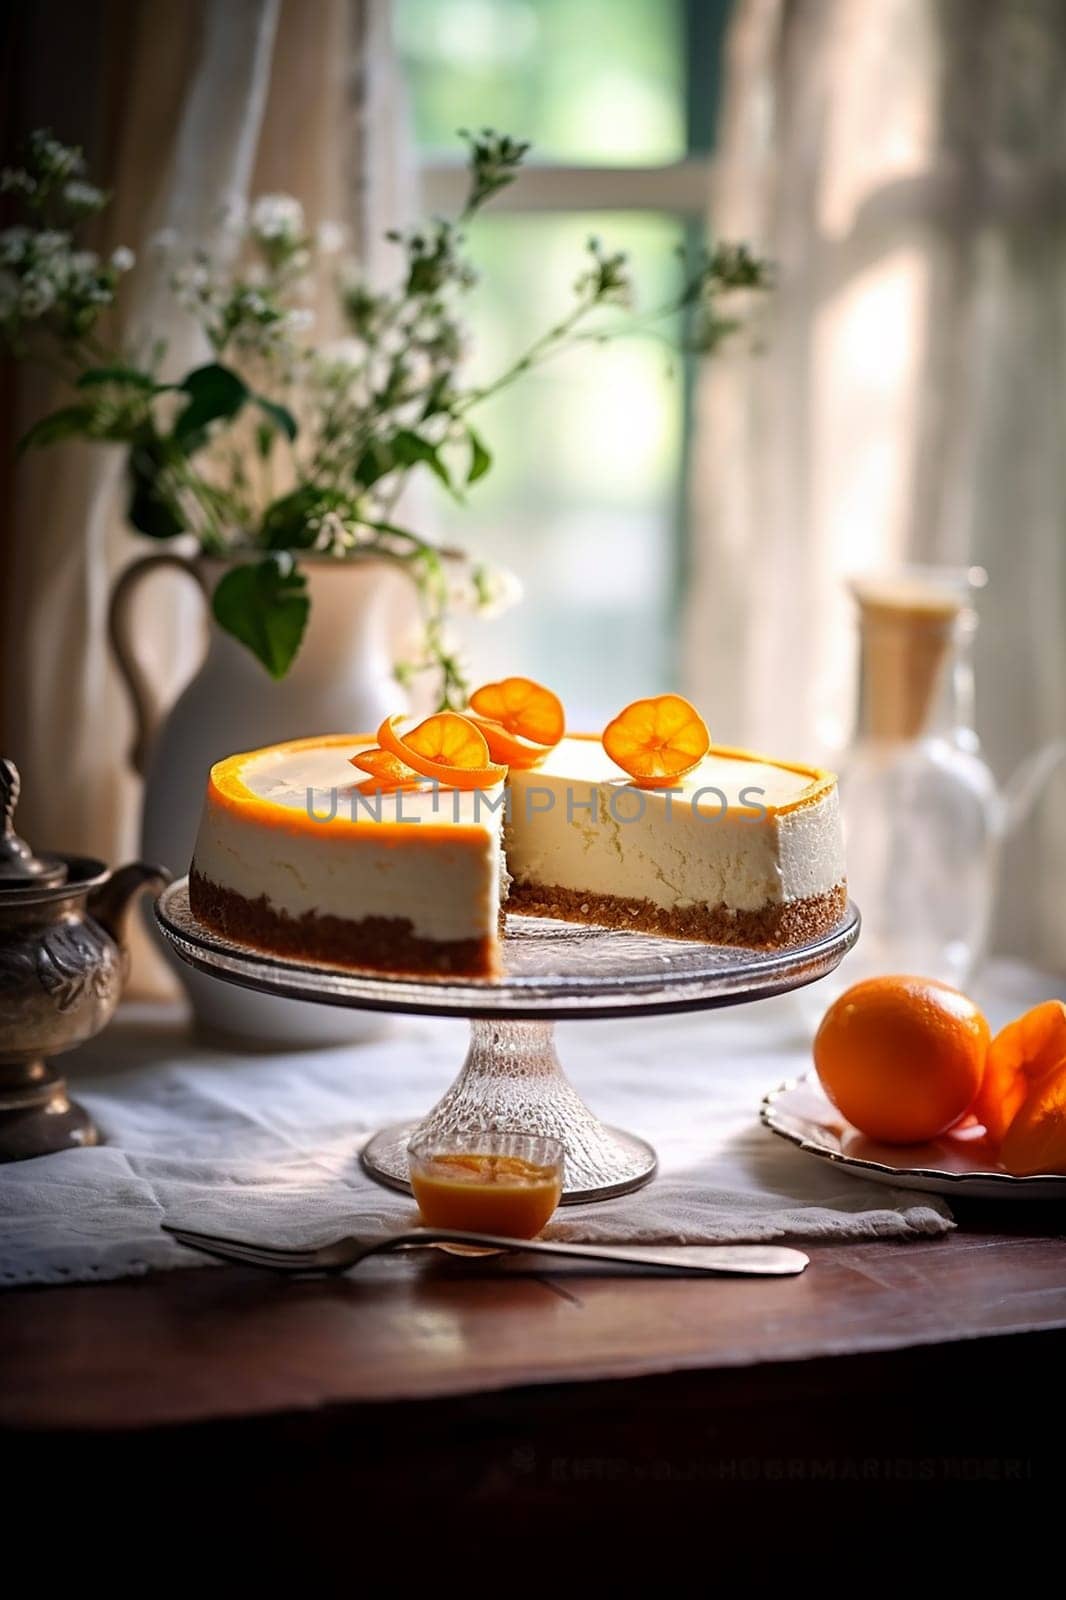 A luscious cheesecake topped with orange slices beside a window.